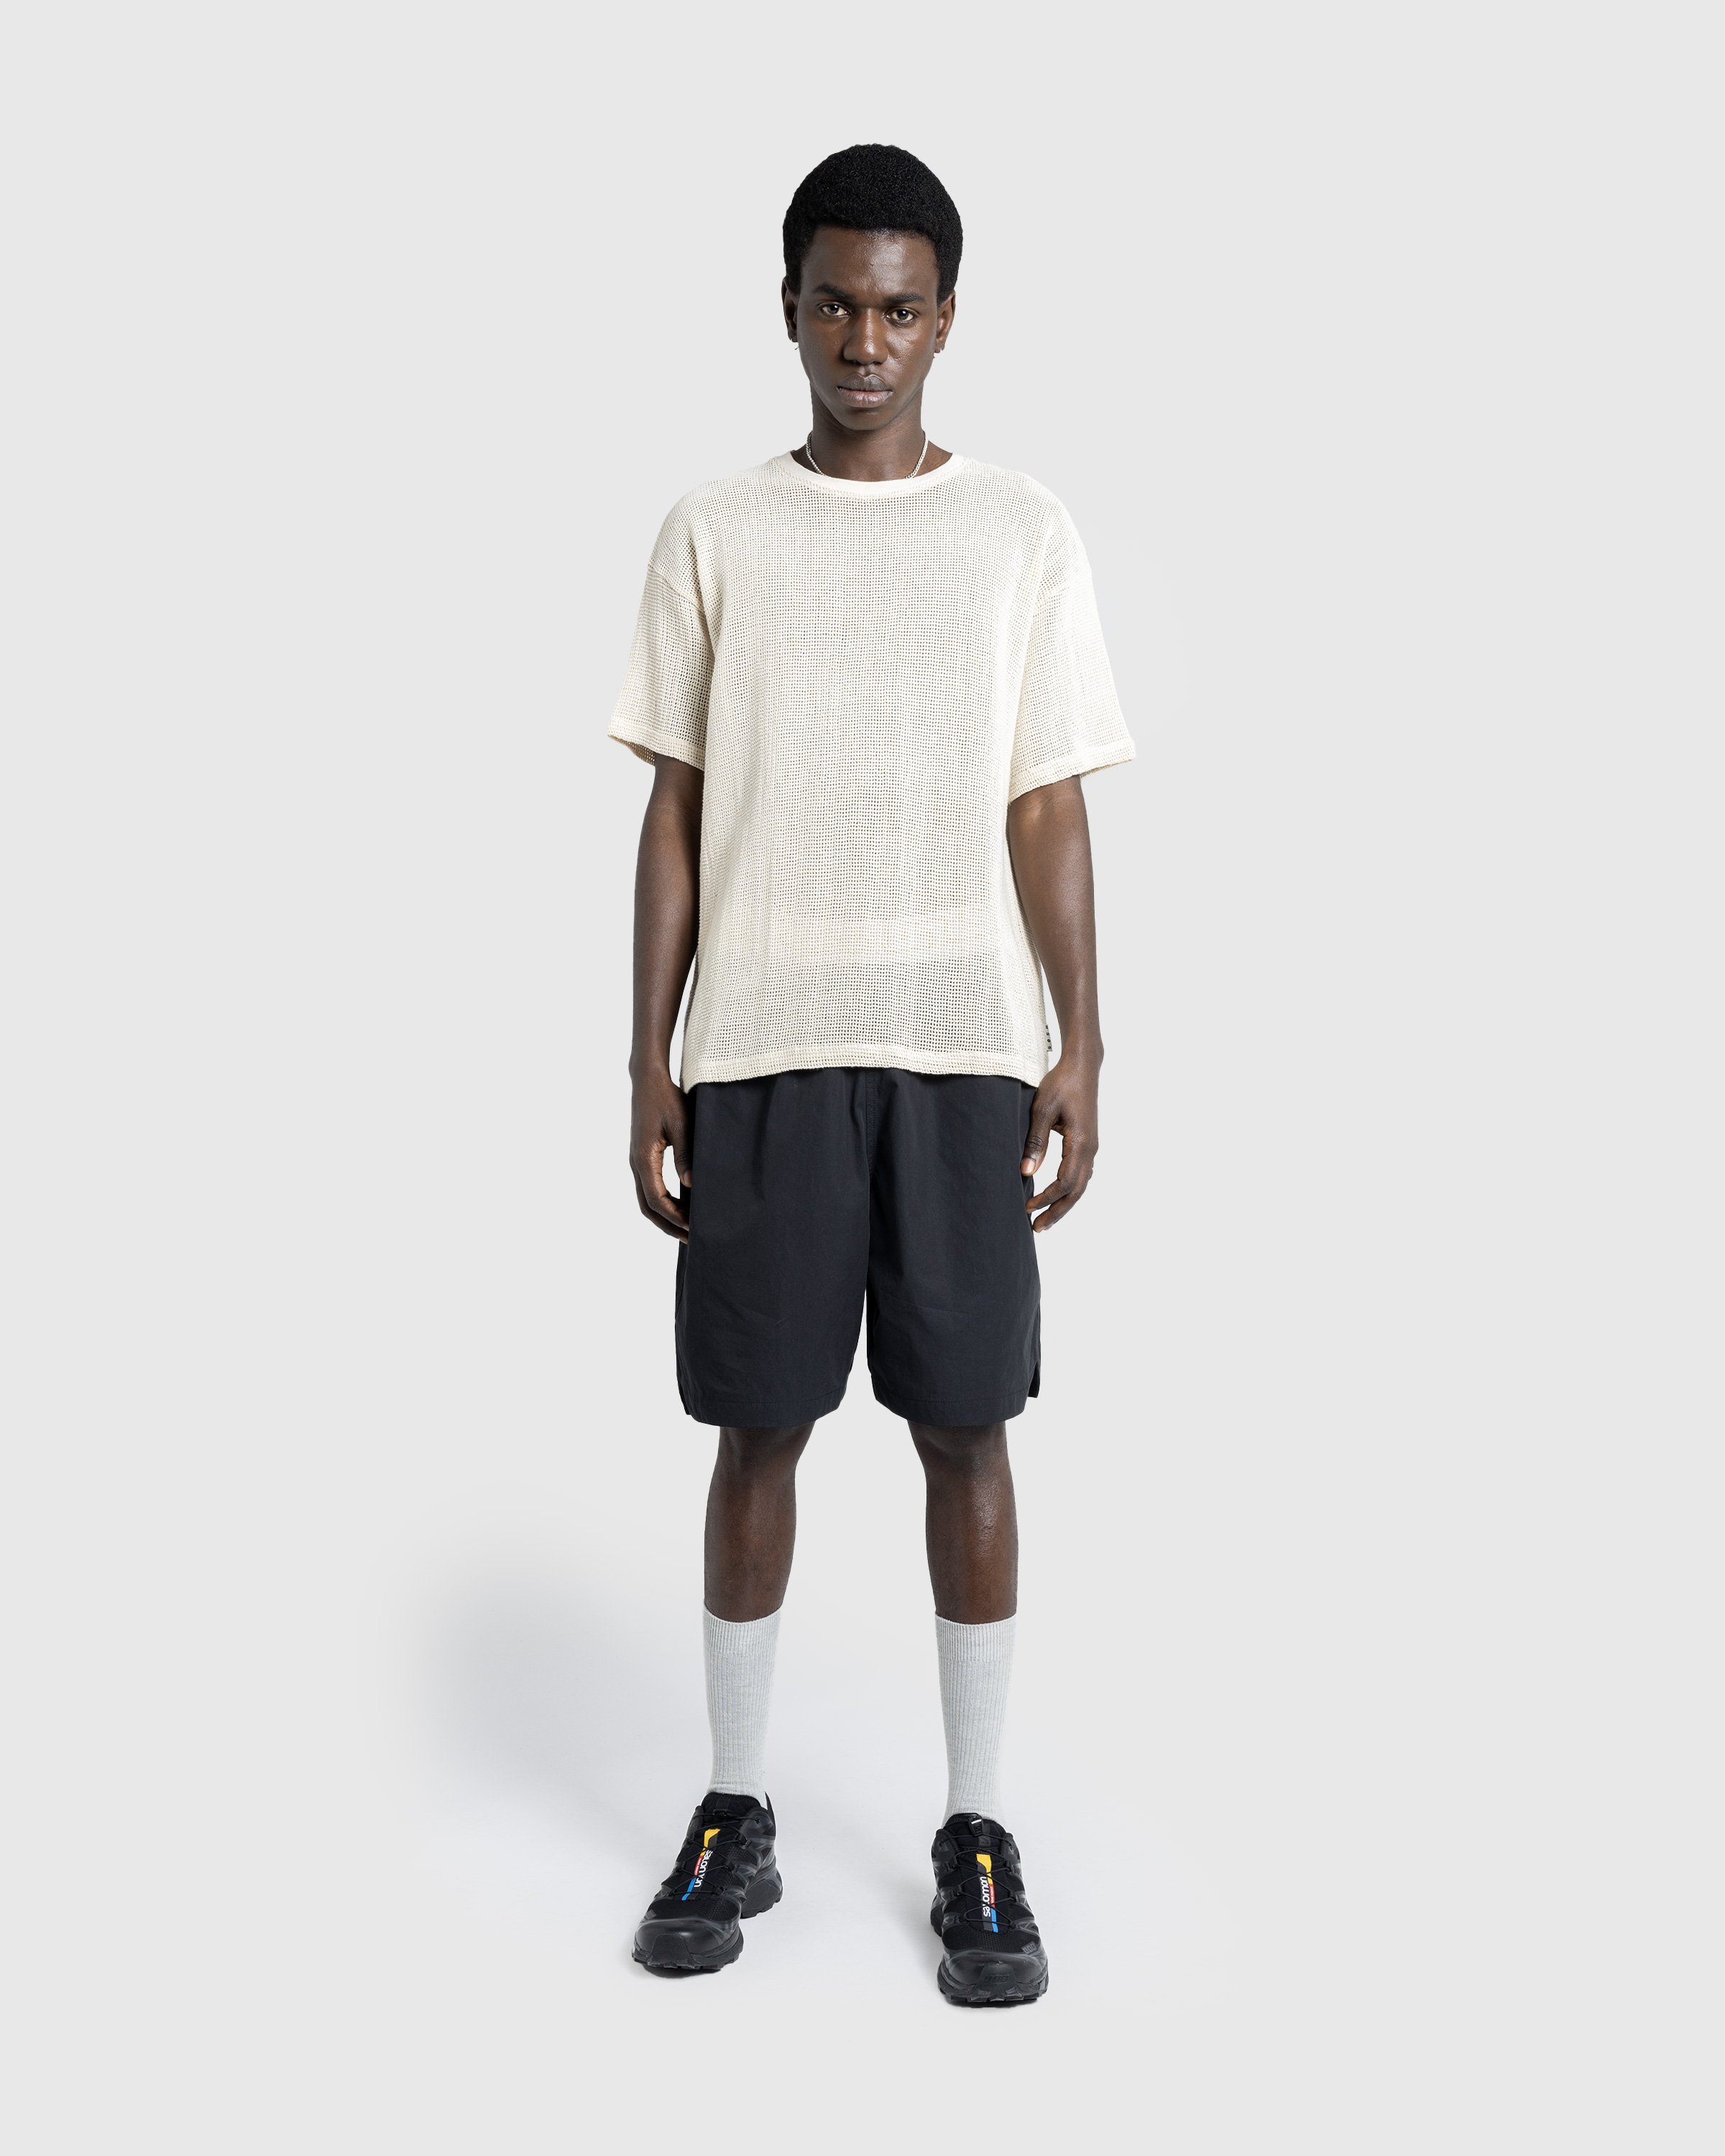 Highsnobiety HS05 - Pigment Dyed Cotton Mesh Knit Natural - Clothing -  - Image 4